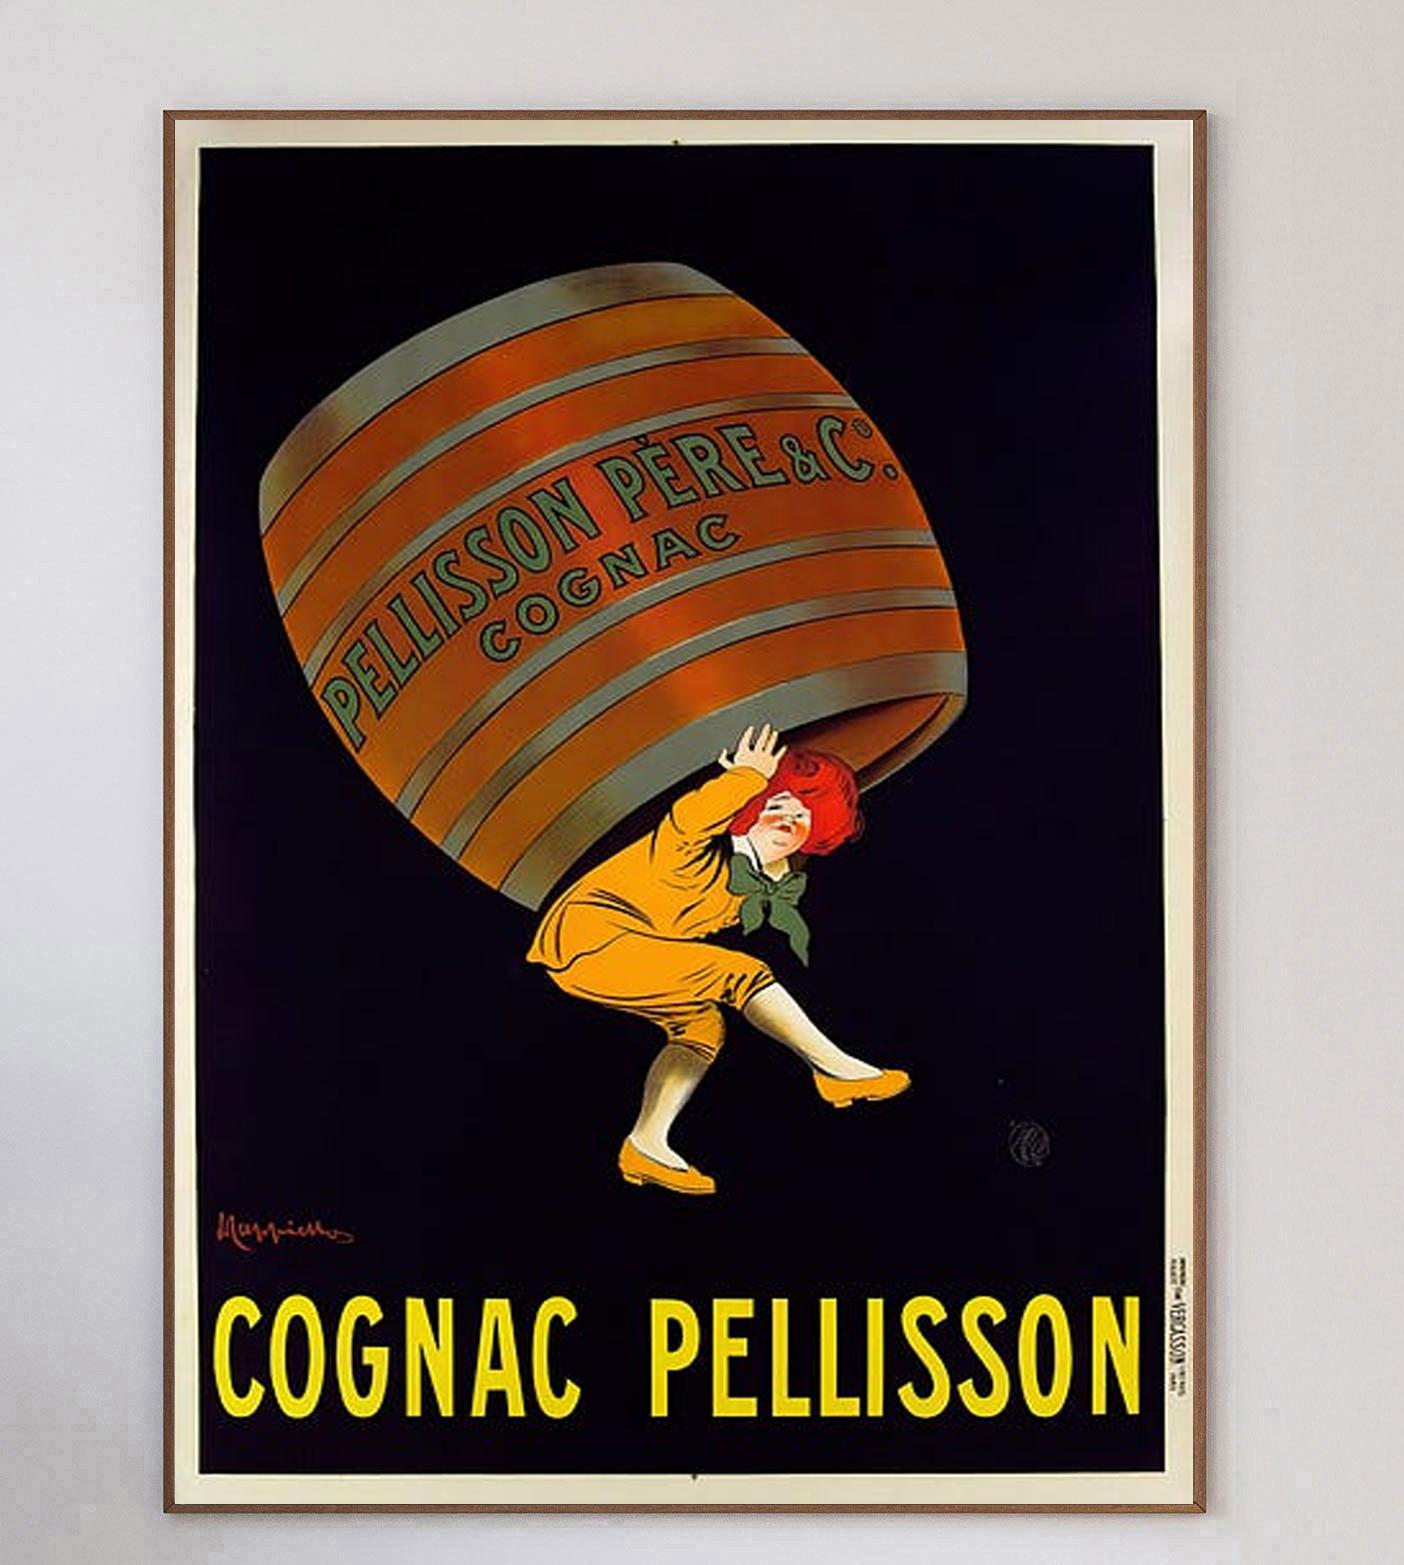 One of the most iconic poster designs of the 20th century by one of the most revered poster artists. Founded in 1836 Cognac Pellisson is a French Liquour company that continues to today. Here the poster promoting the brand depicts a woman carrying